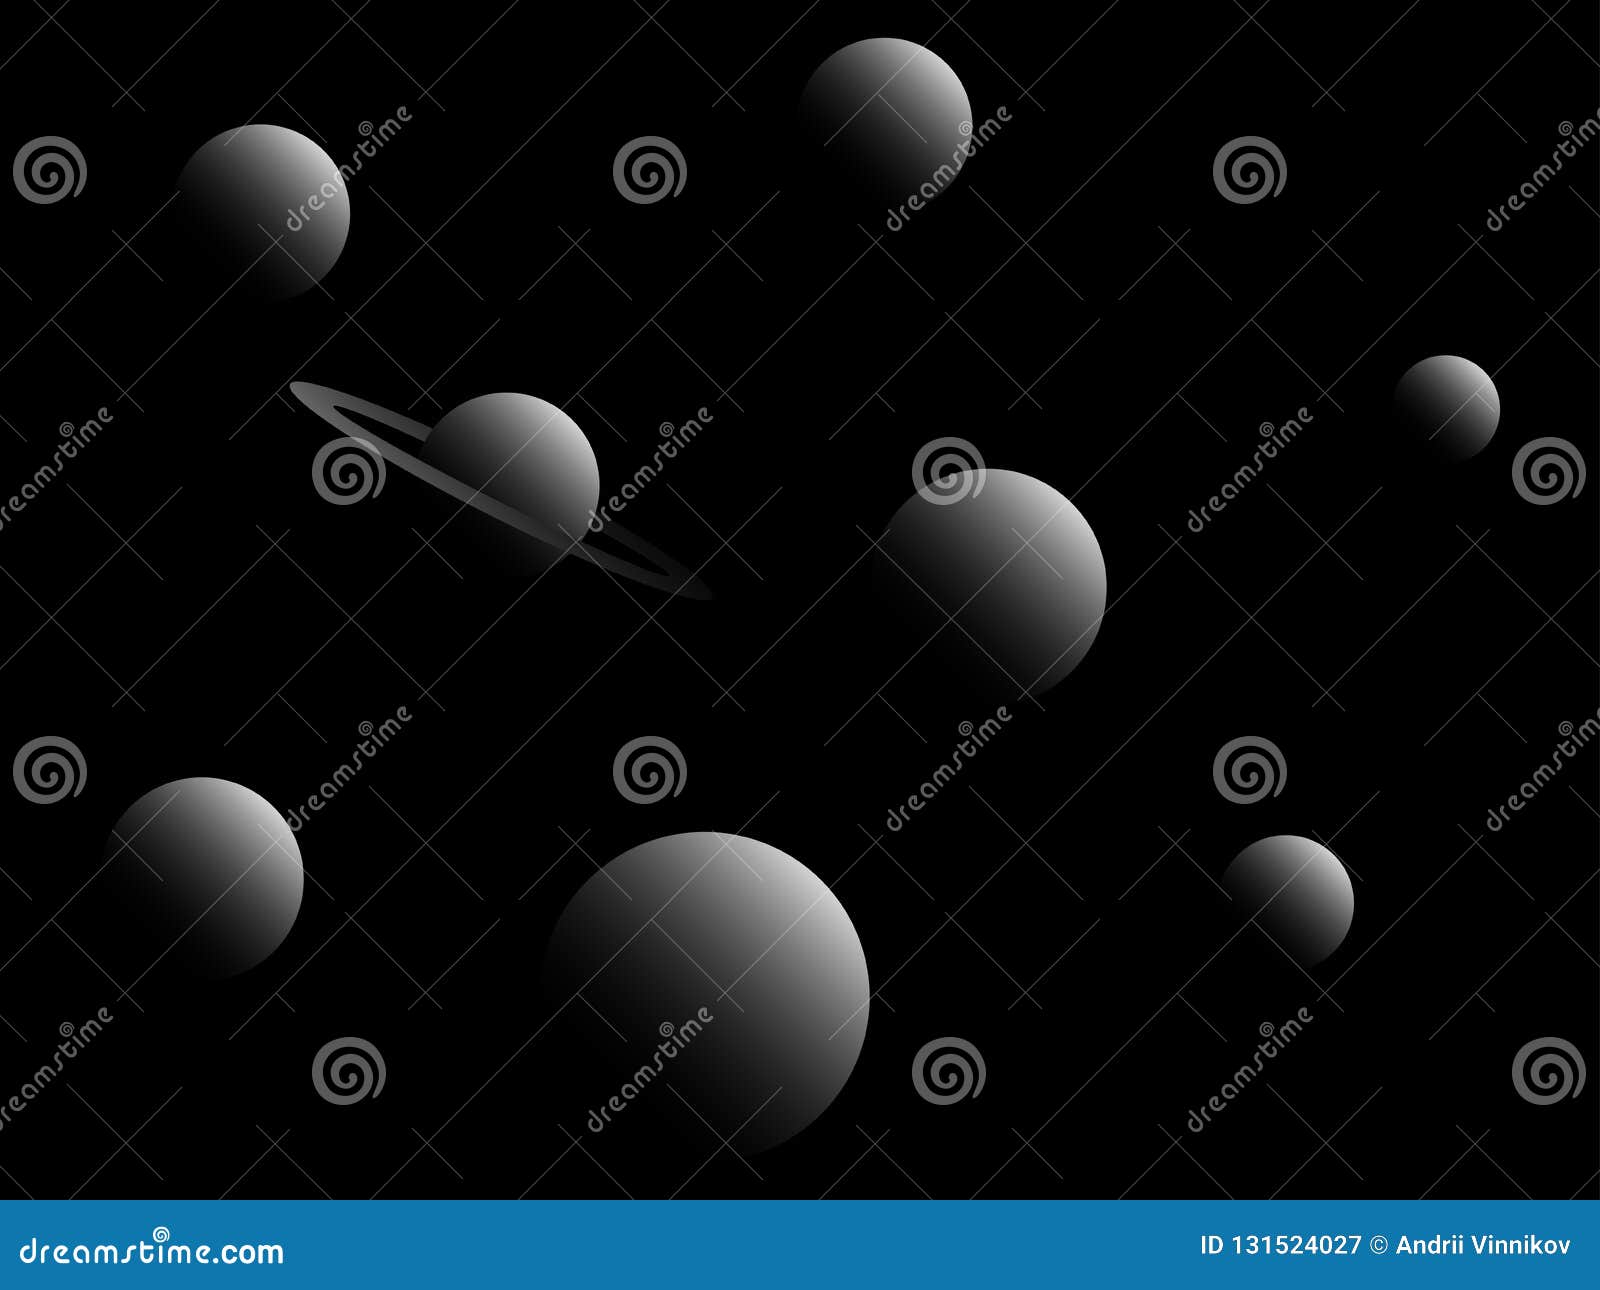 Planets of the Solar System. Cosmos in Black and White. Retro Space